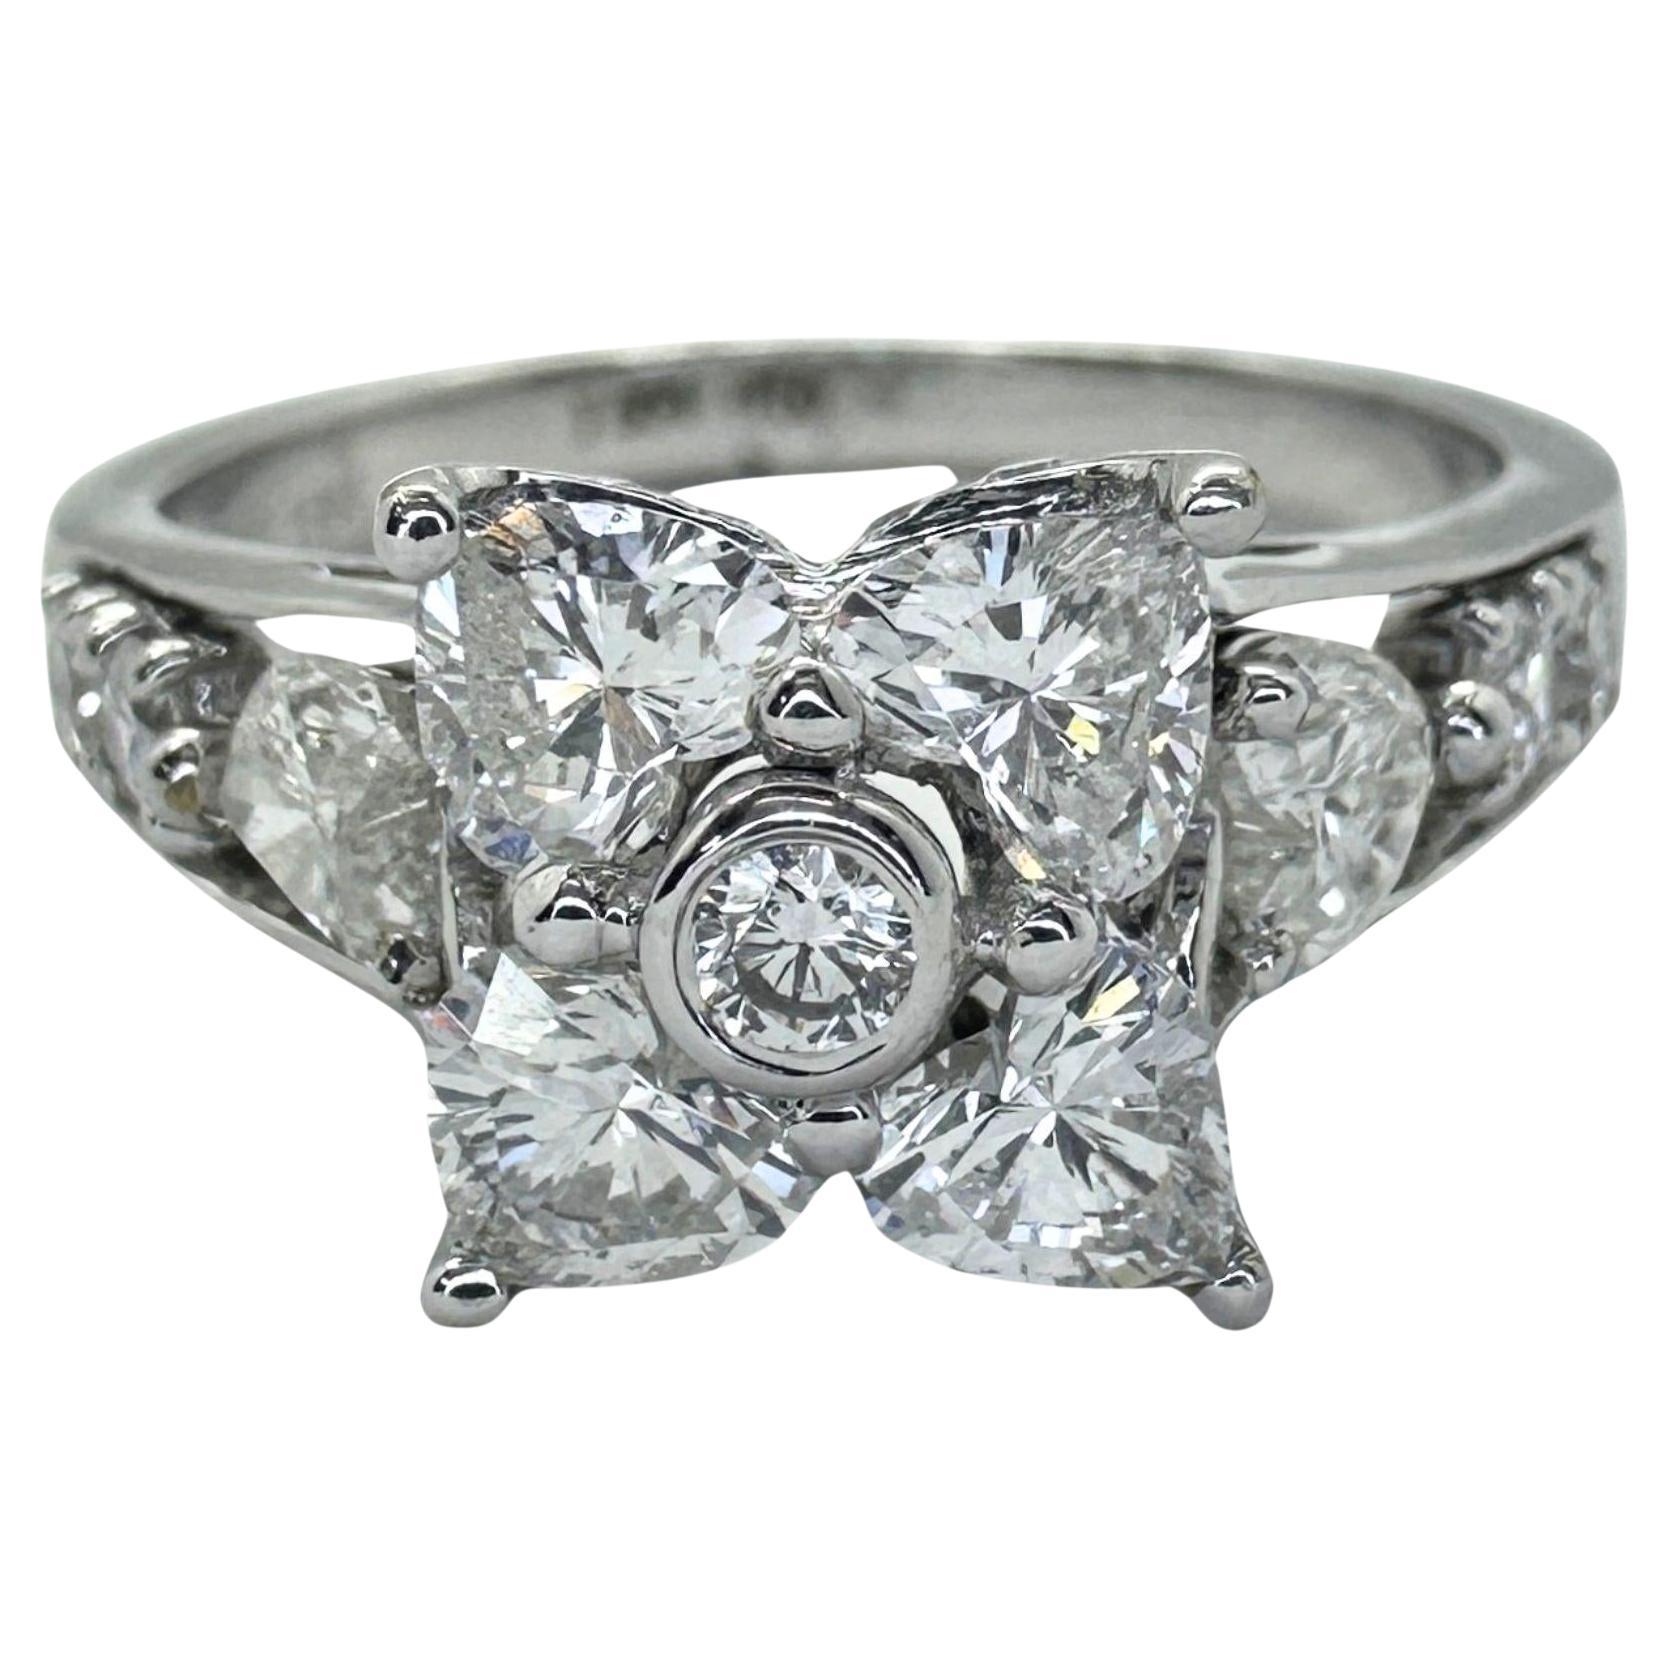 18k Diamond Ring with Floral Design and Side Heart Shaped Diamonds.